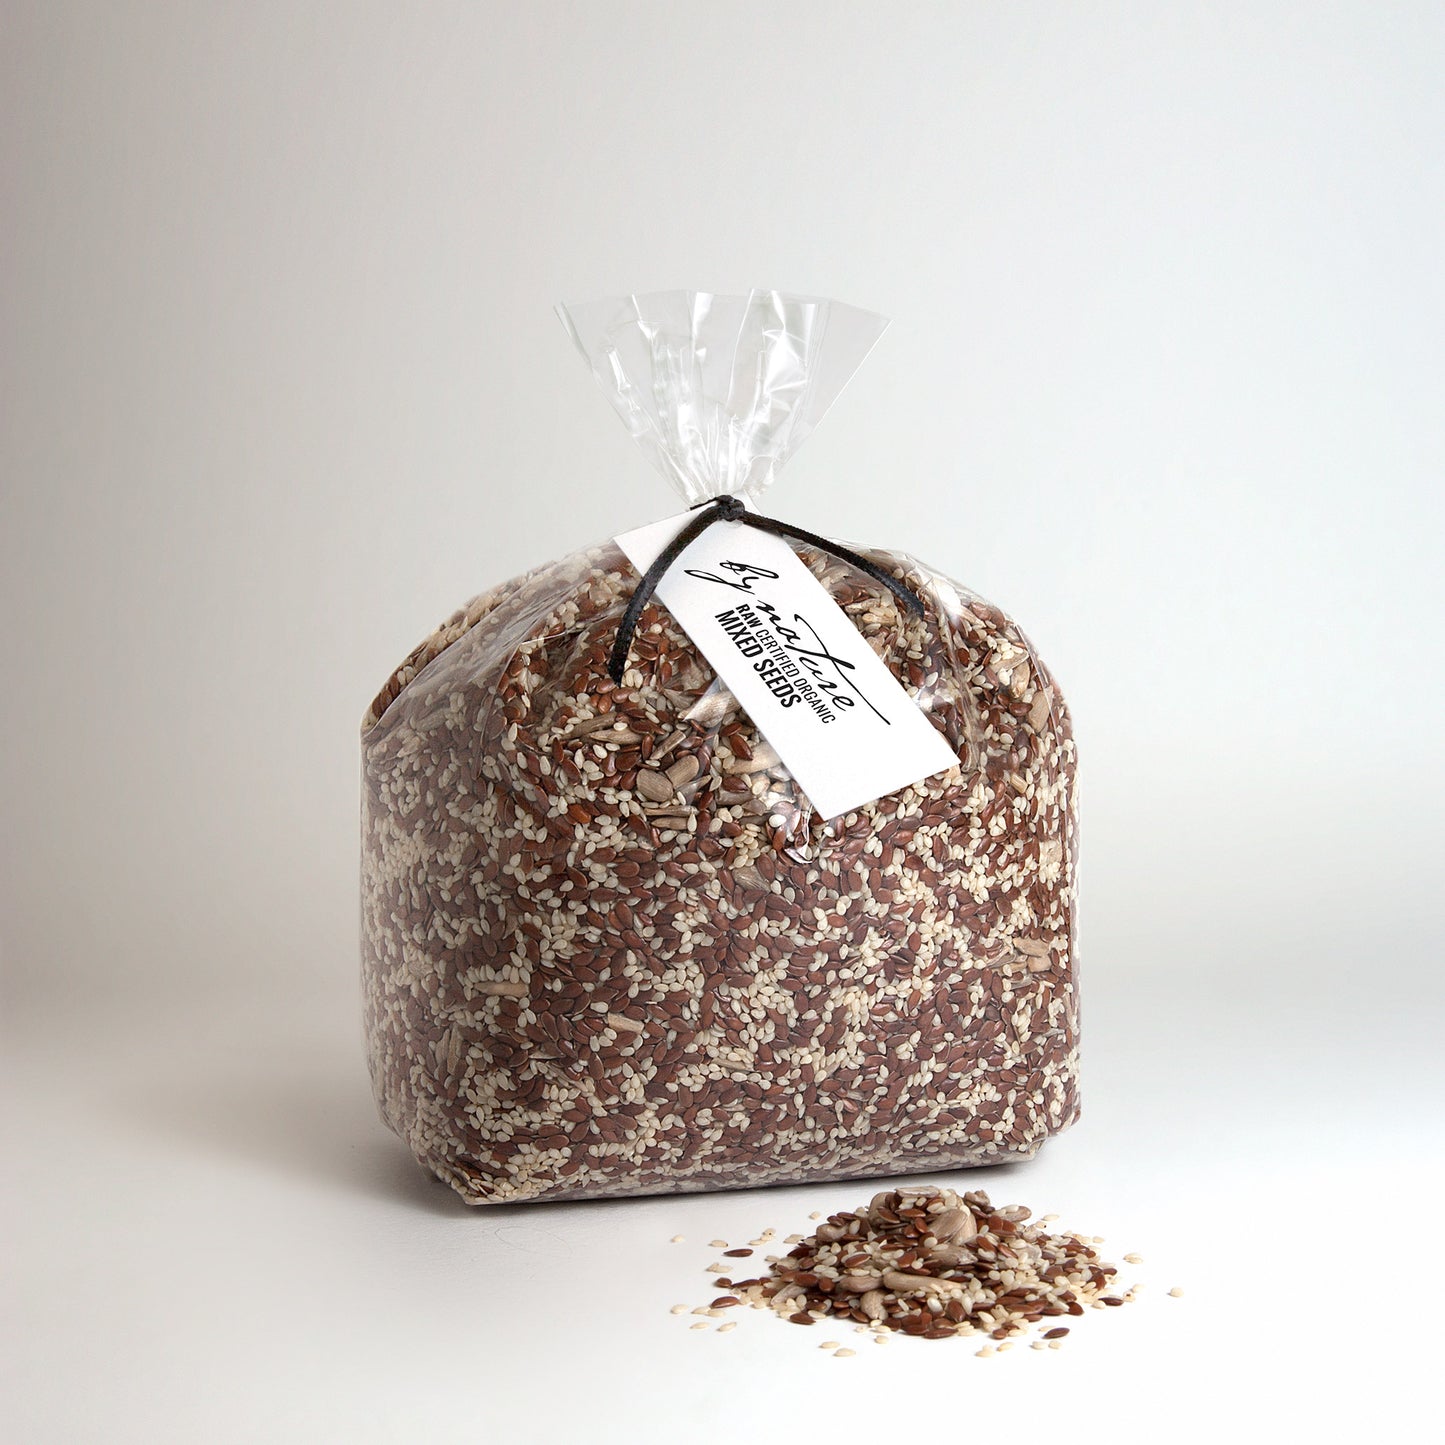 BY NATURE Mixed Seeds, 1kg - flax, sesame, sunflower, raw, certified organic at source.